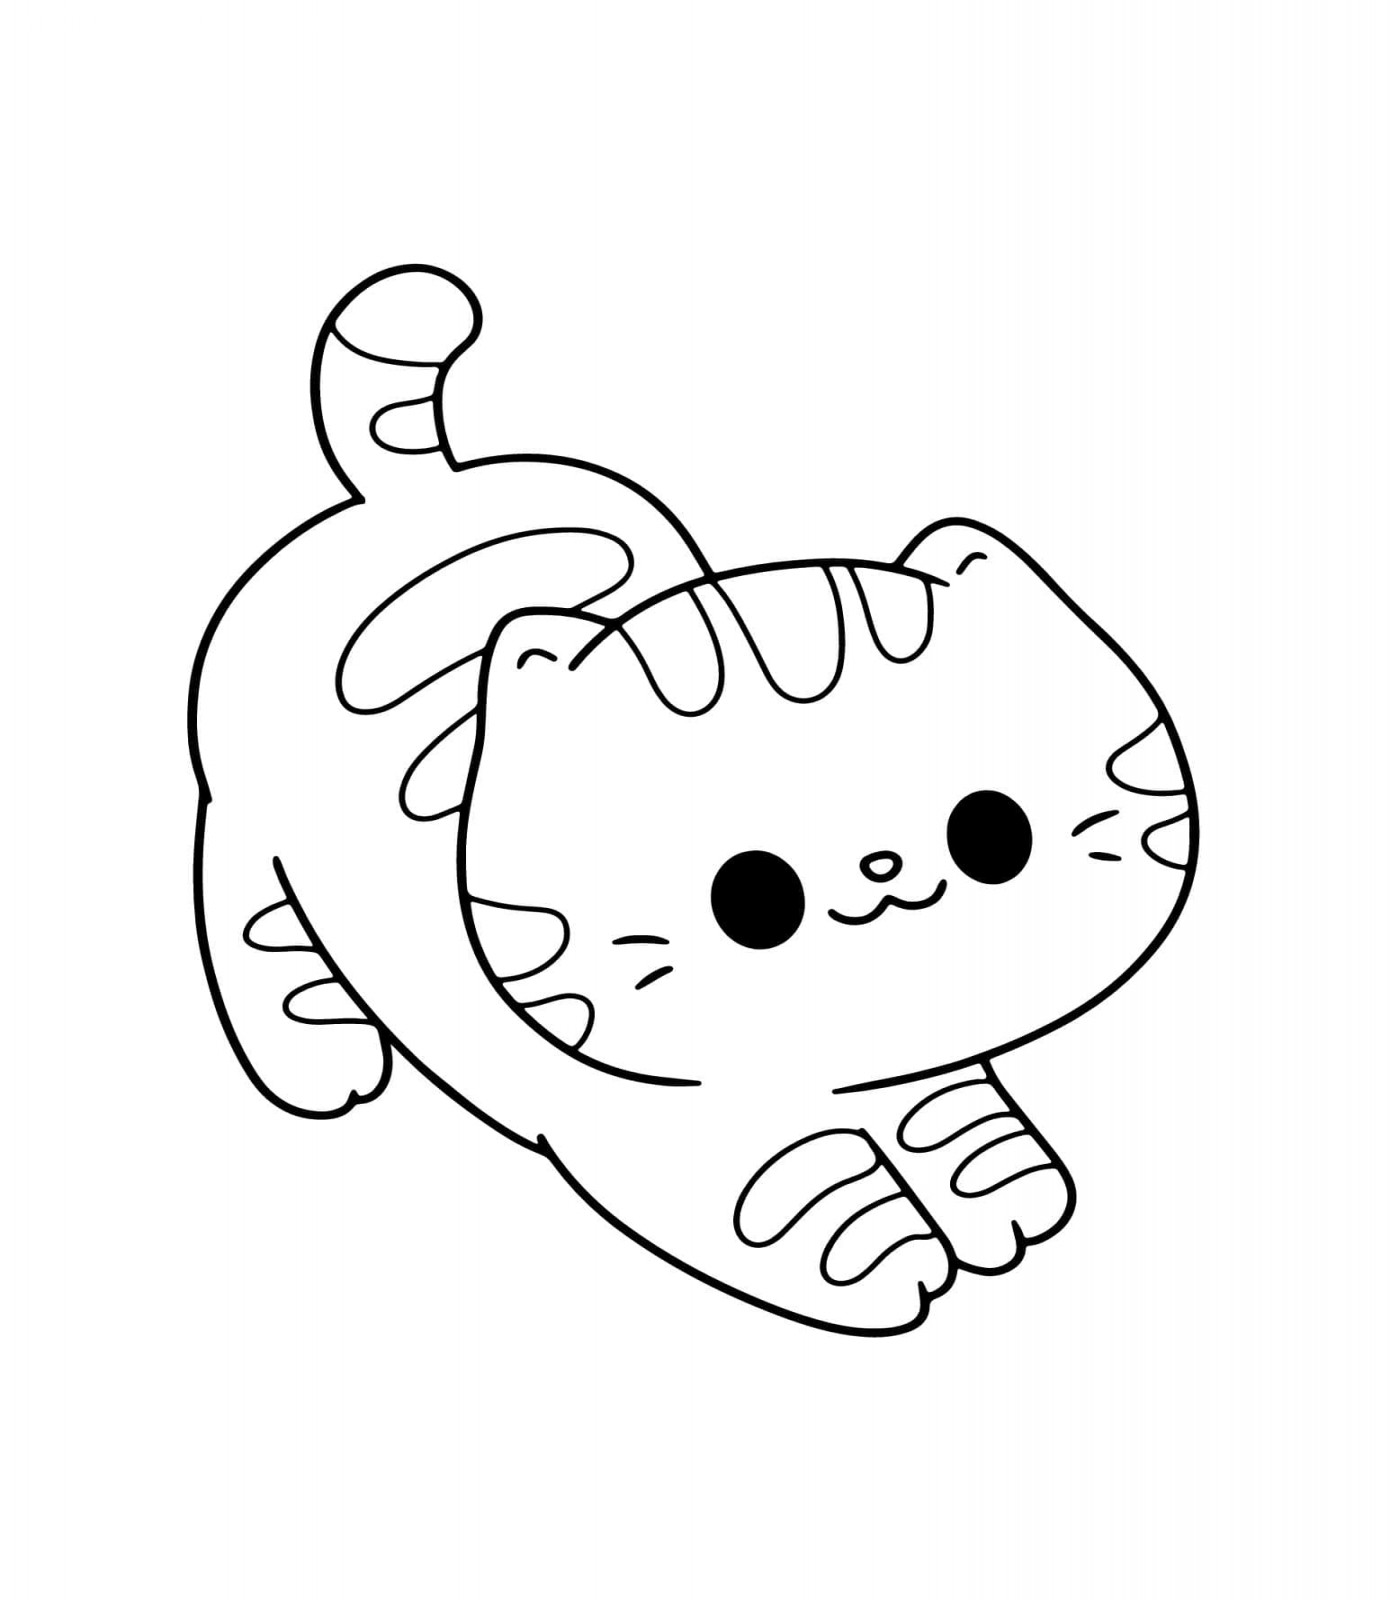 Cute Cat Coloring Pages For Kids and Adults - Our Mindful Life